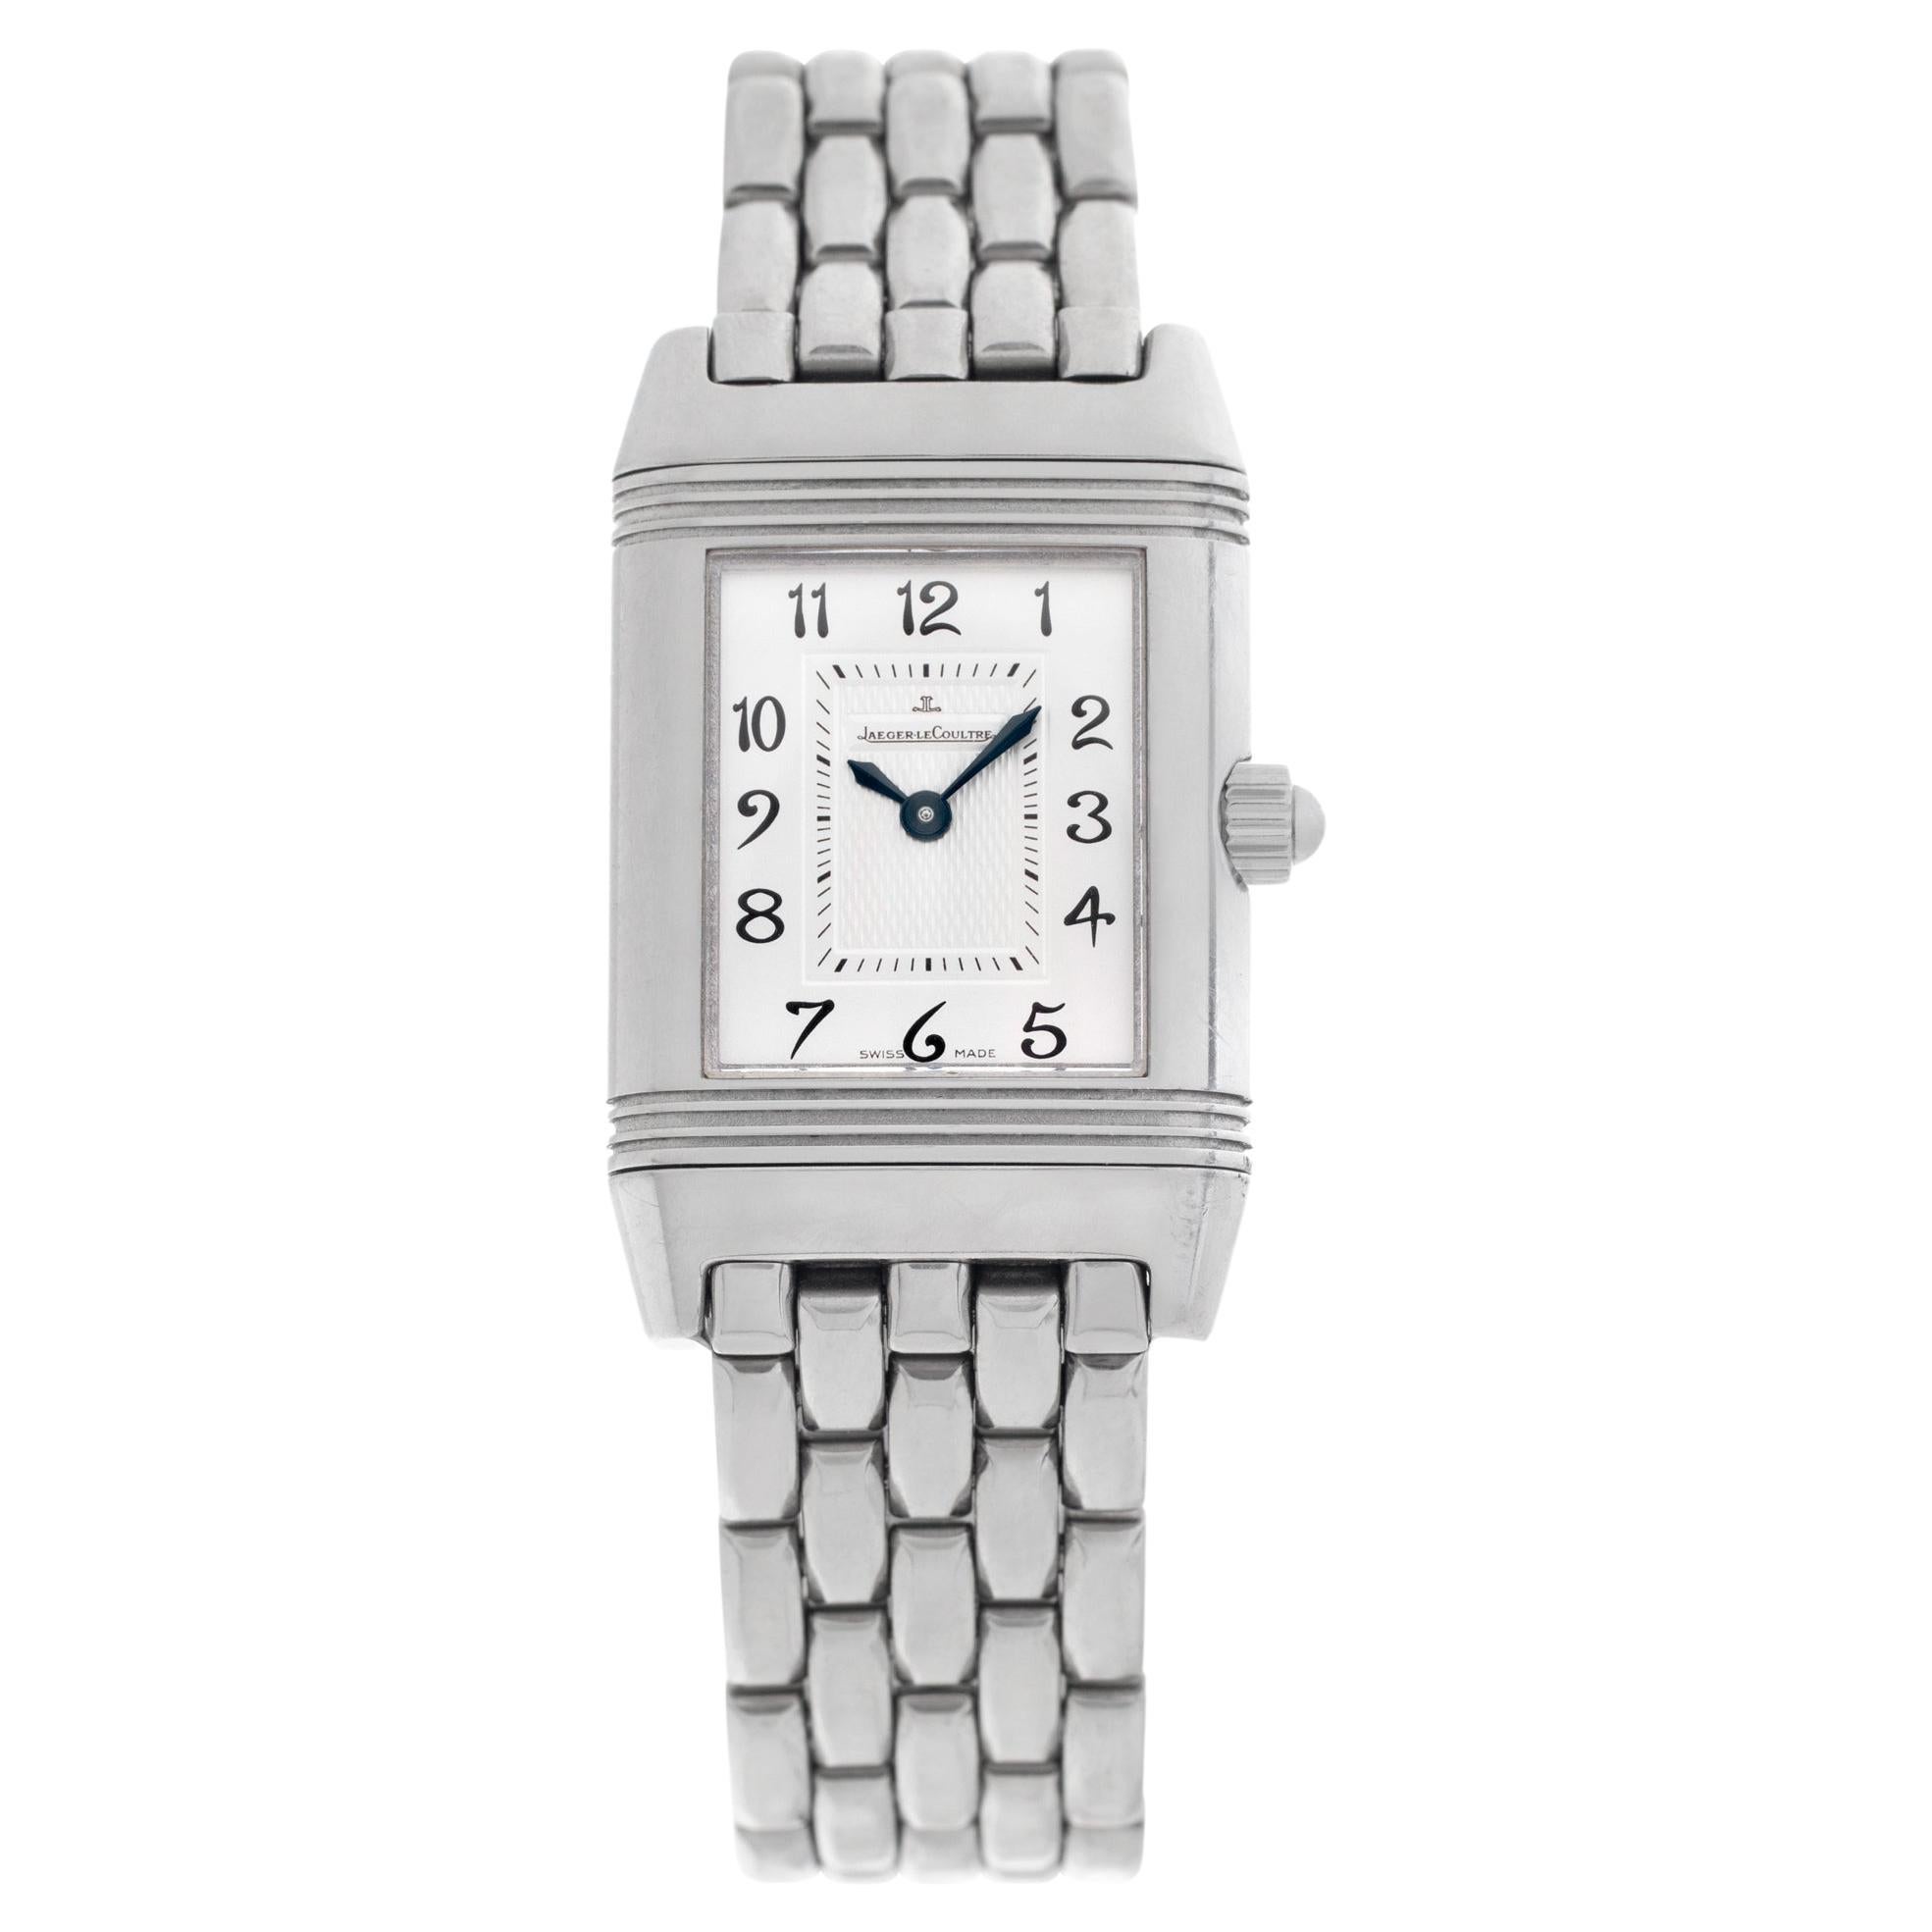 Jaeger-LeCoultre Reverso Duetto Duo 266.8.11